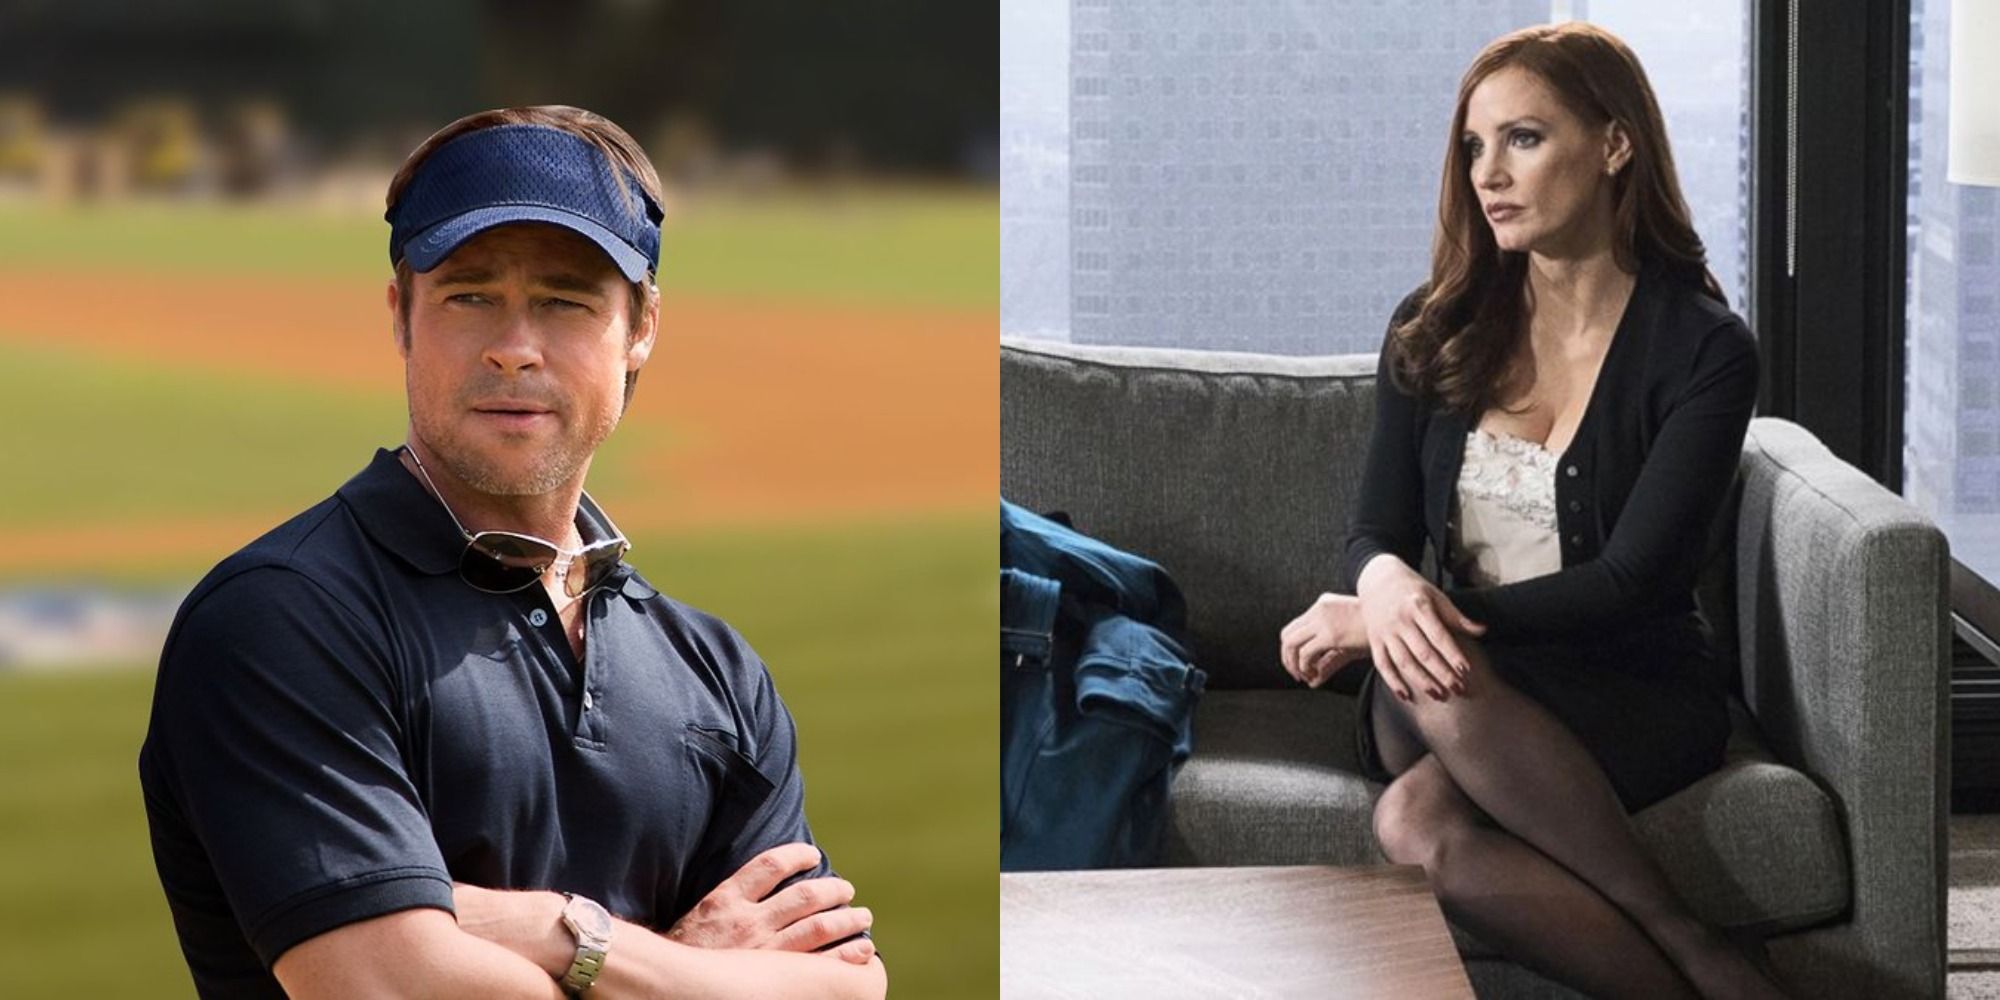 Brad Pitt in Moneyball and Jessica Chastain in Molly's Game